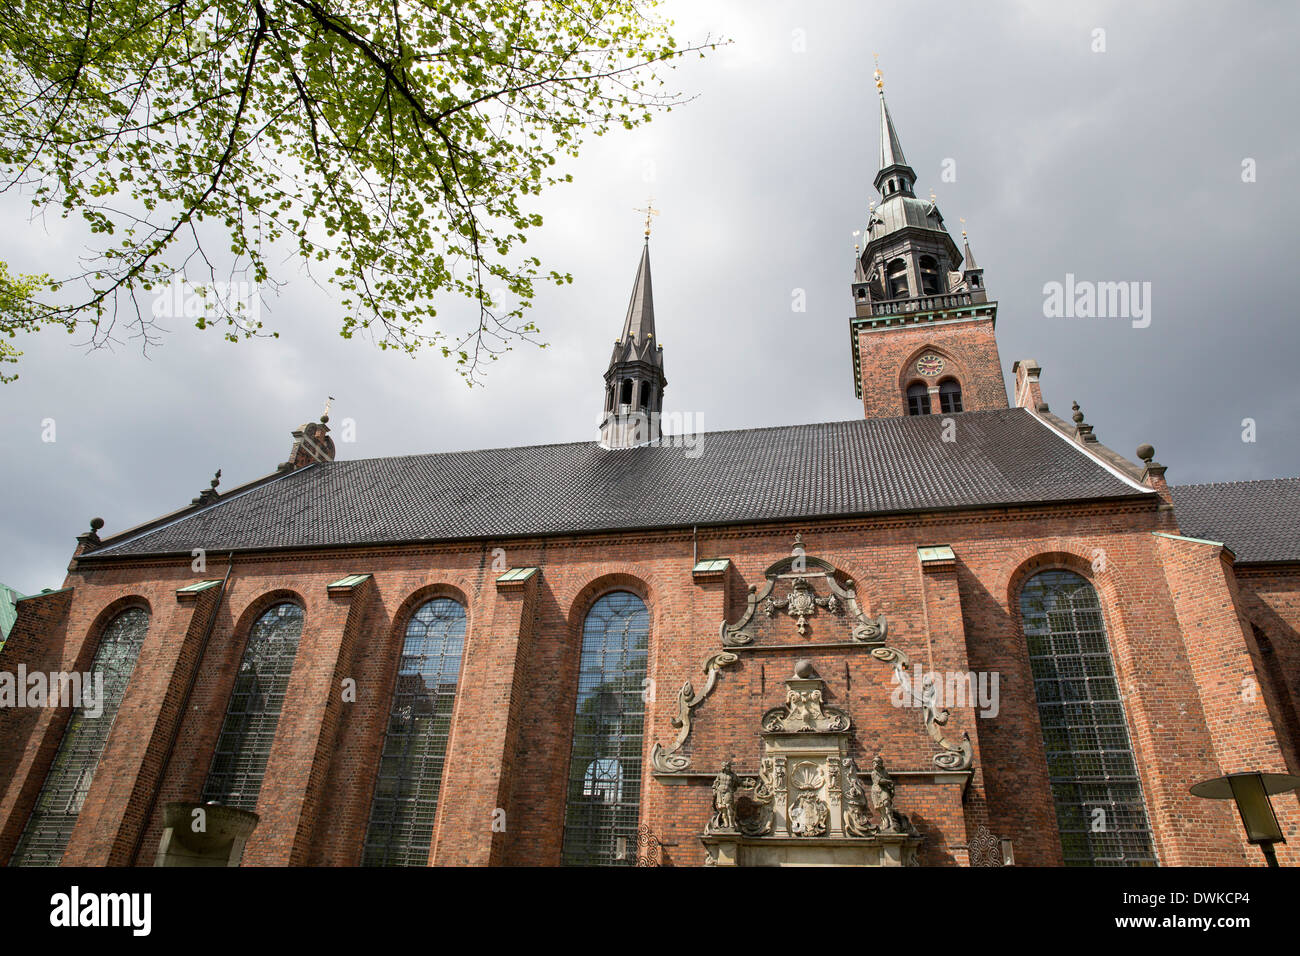 Helligandskirken - Church of the Holy Ghost in Stock Photo - Alamy